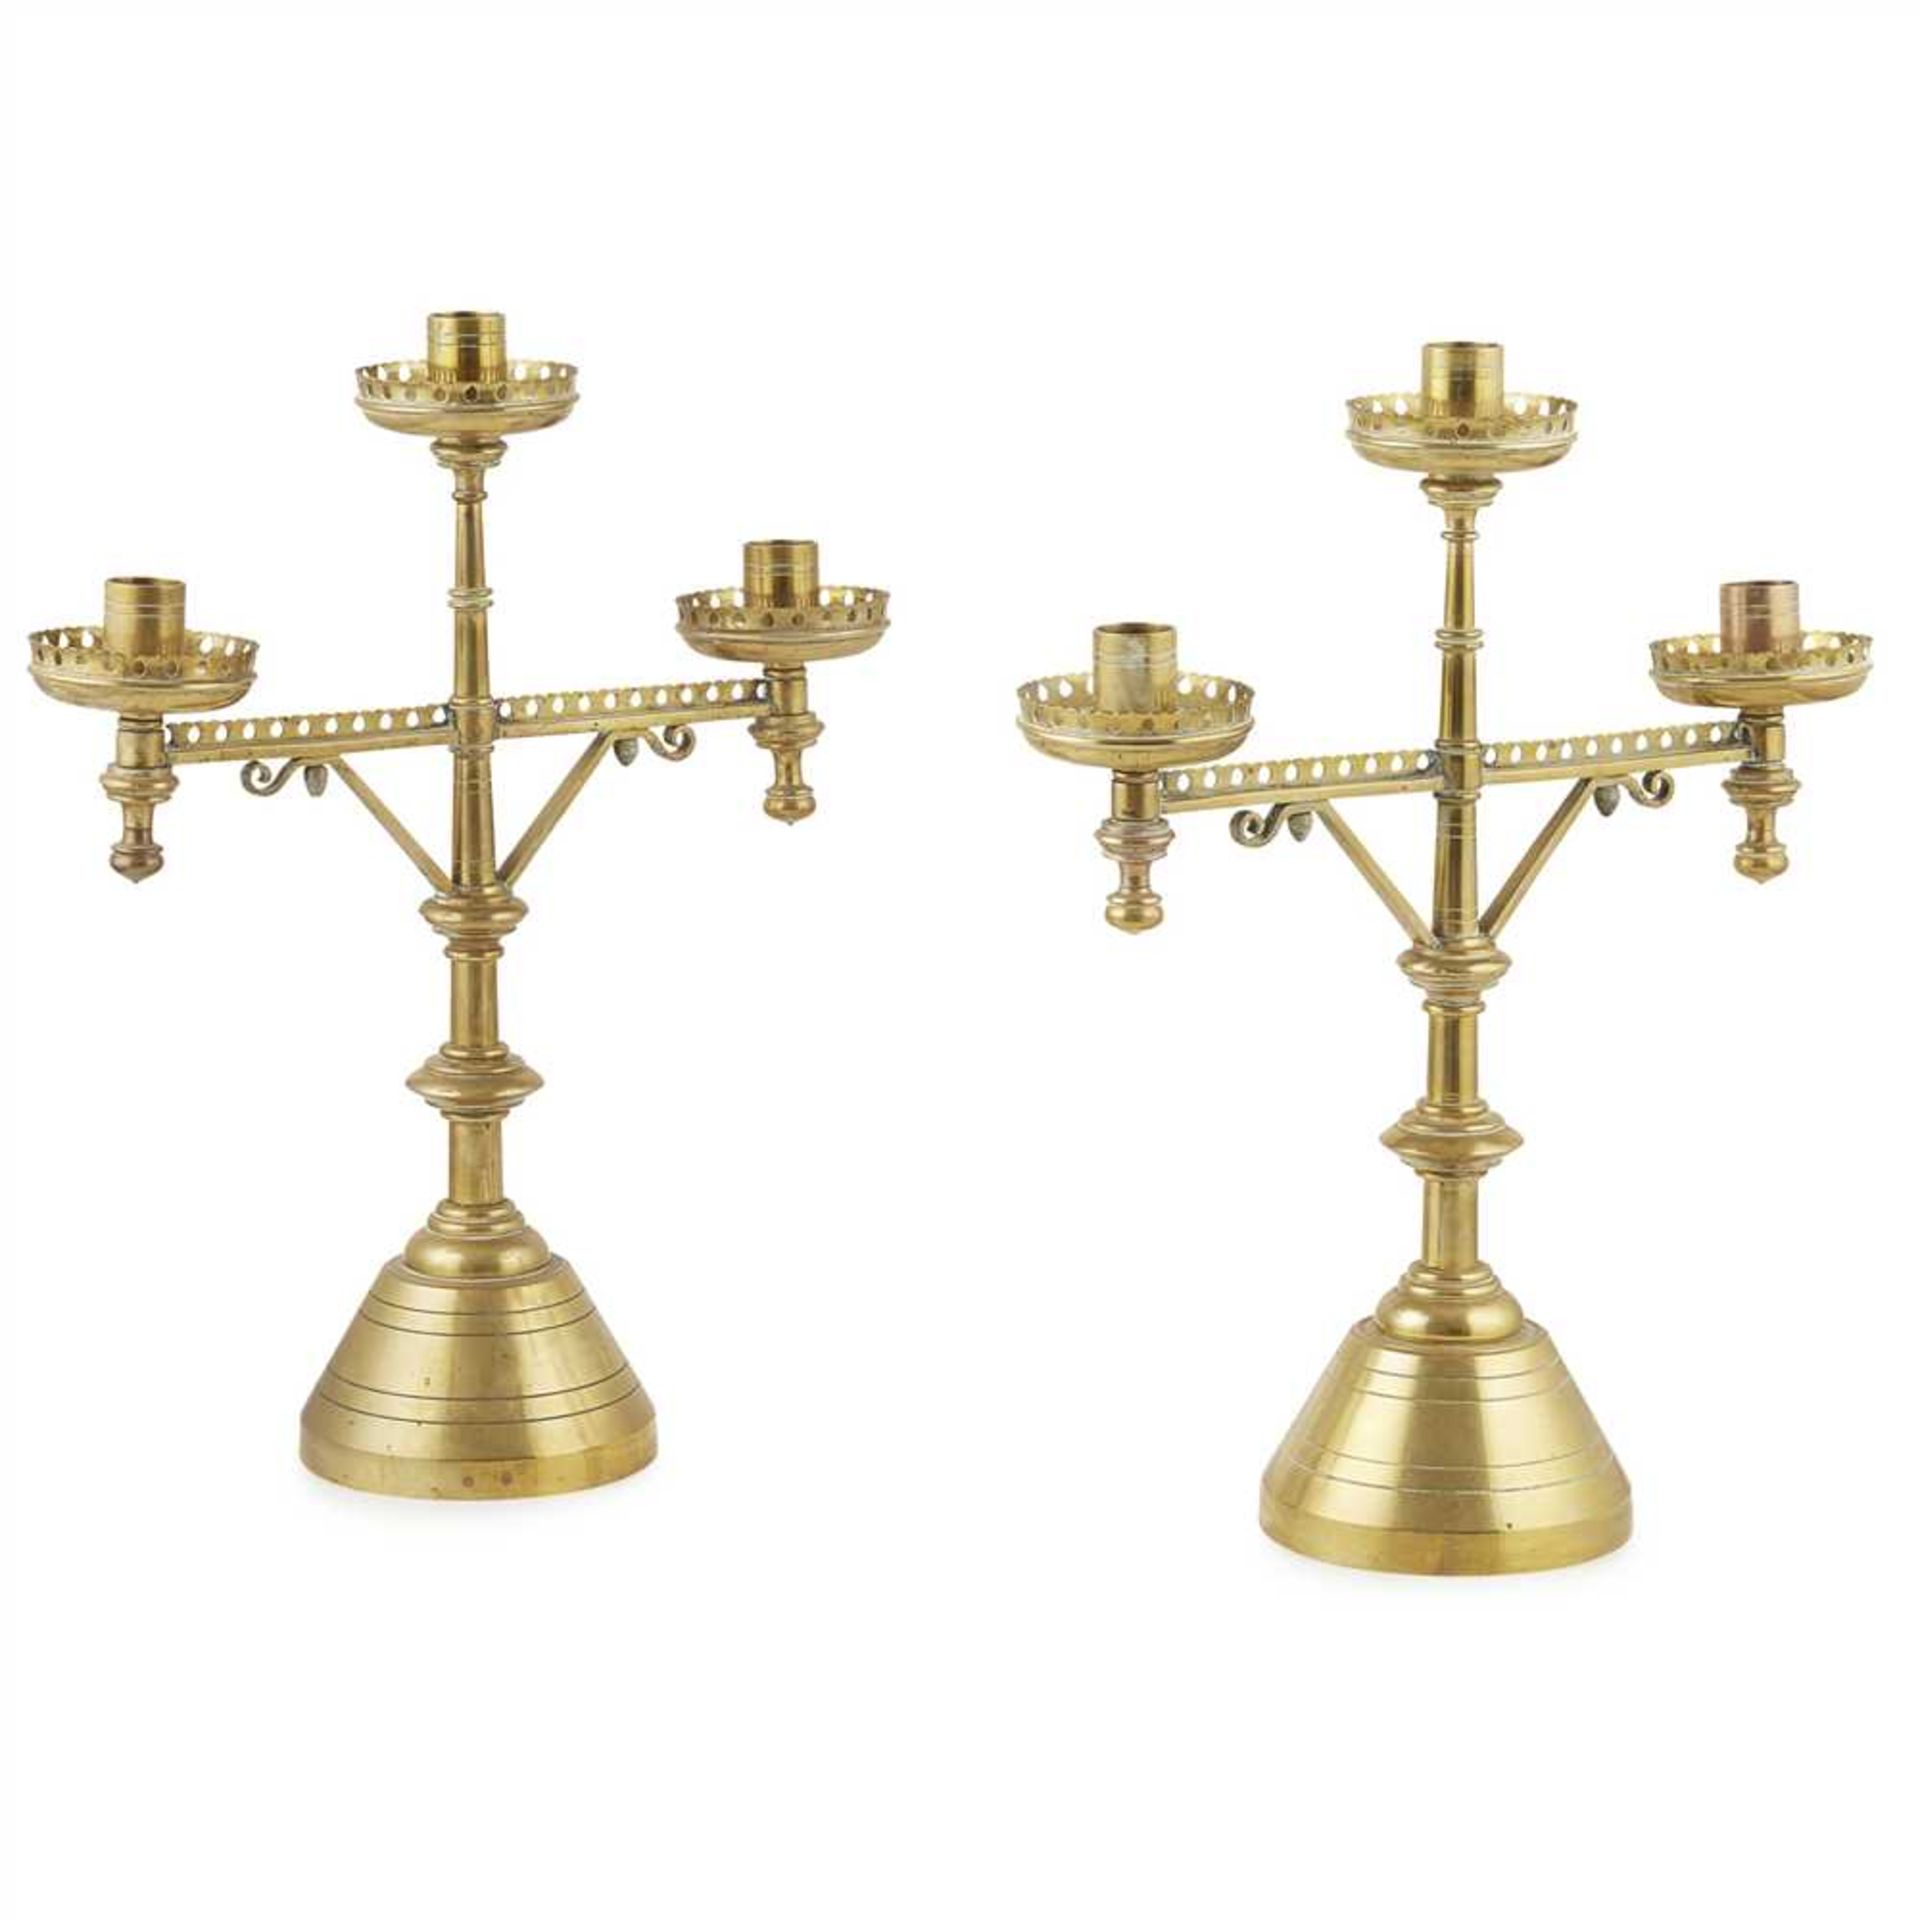 ATTRIBUTED TO HART SON & PEARD PAIR OF GOTHIC REVIVAL BRASS CANDELABRA, CIRCA 1870 each with a - Image 3 of 3